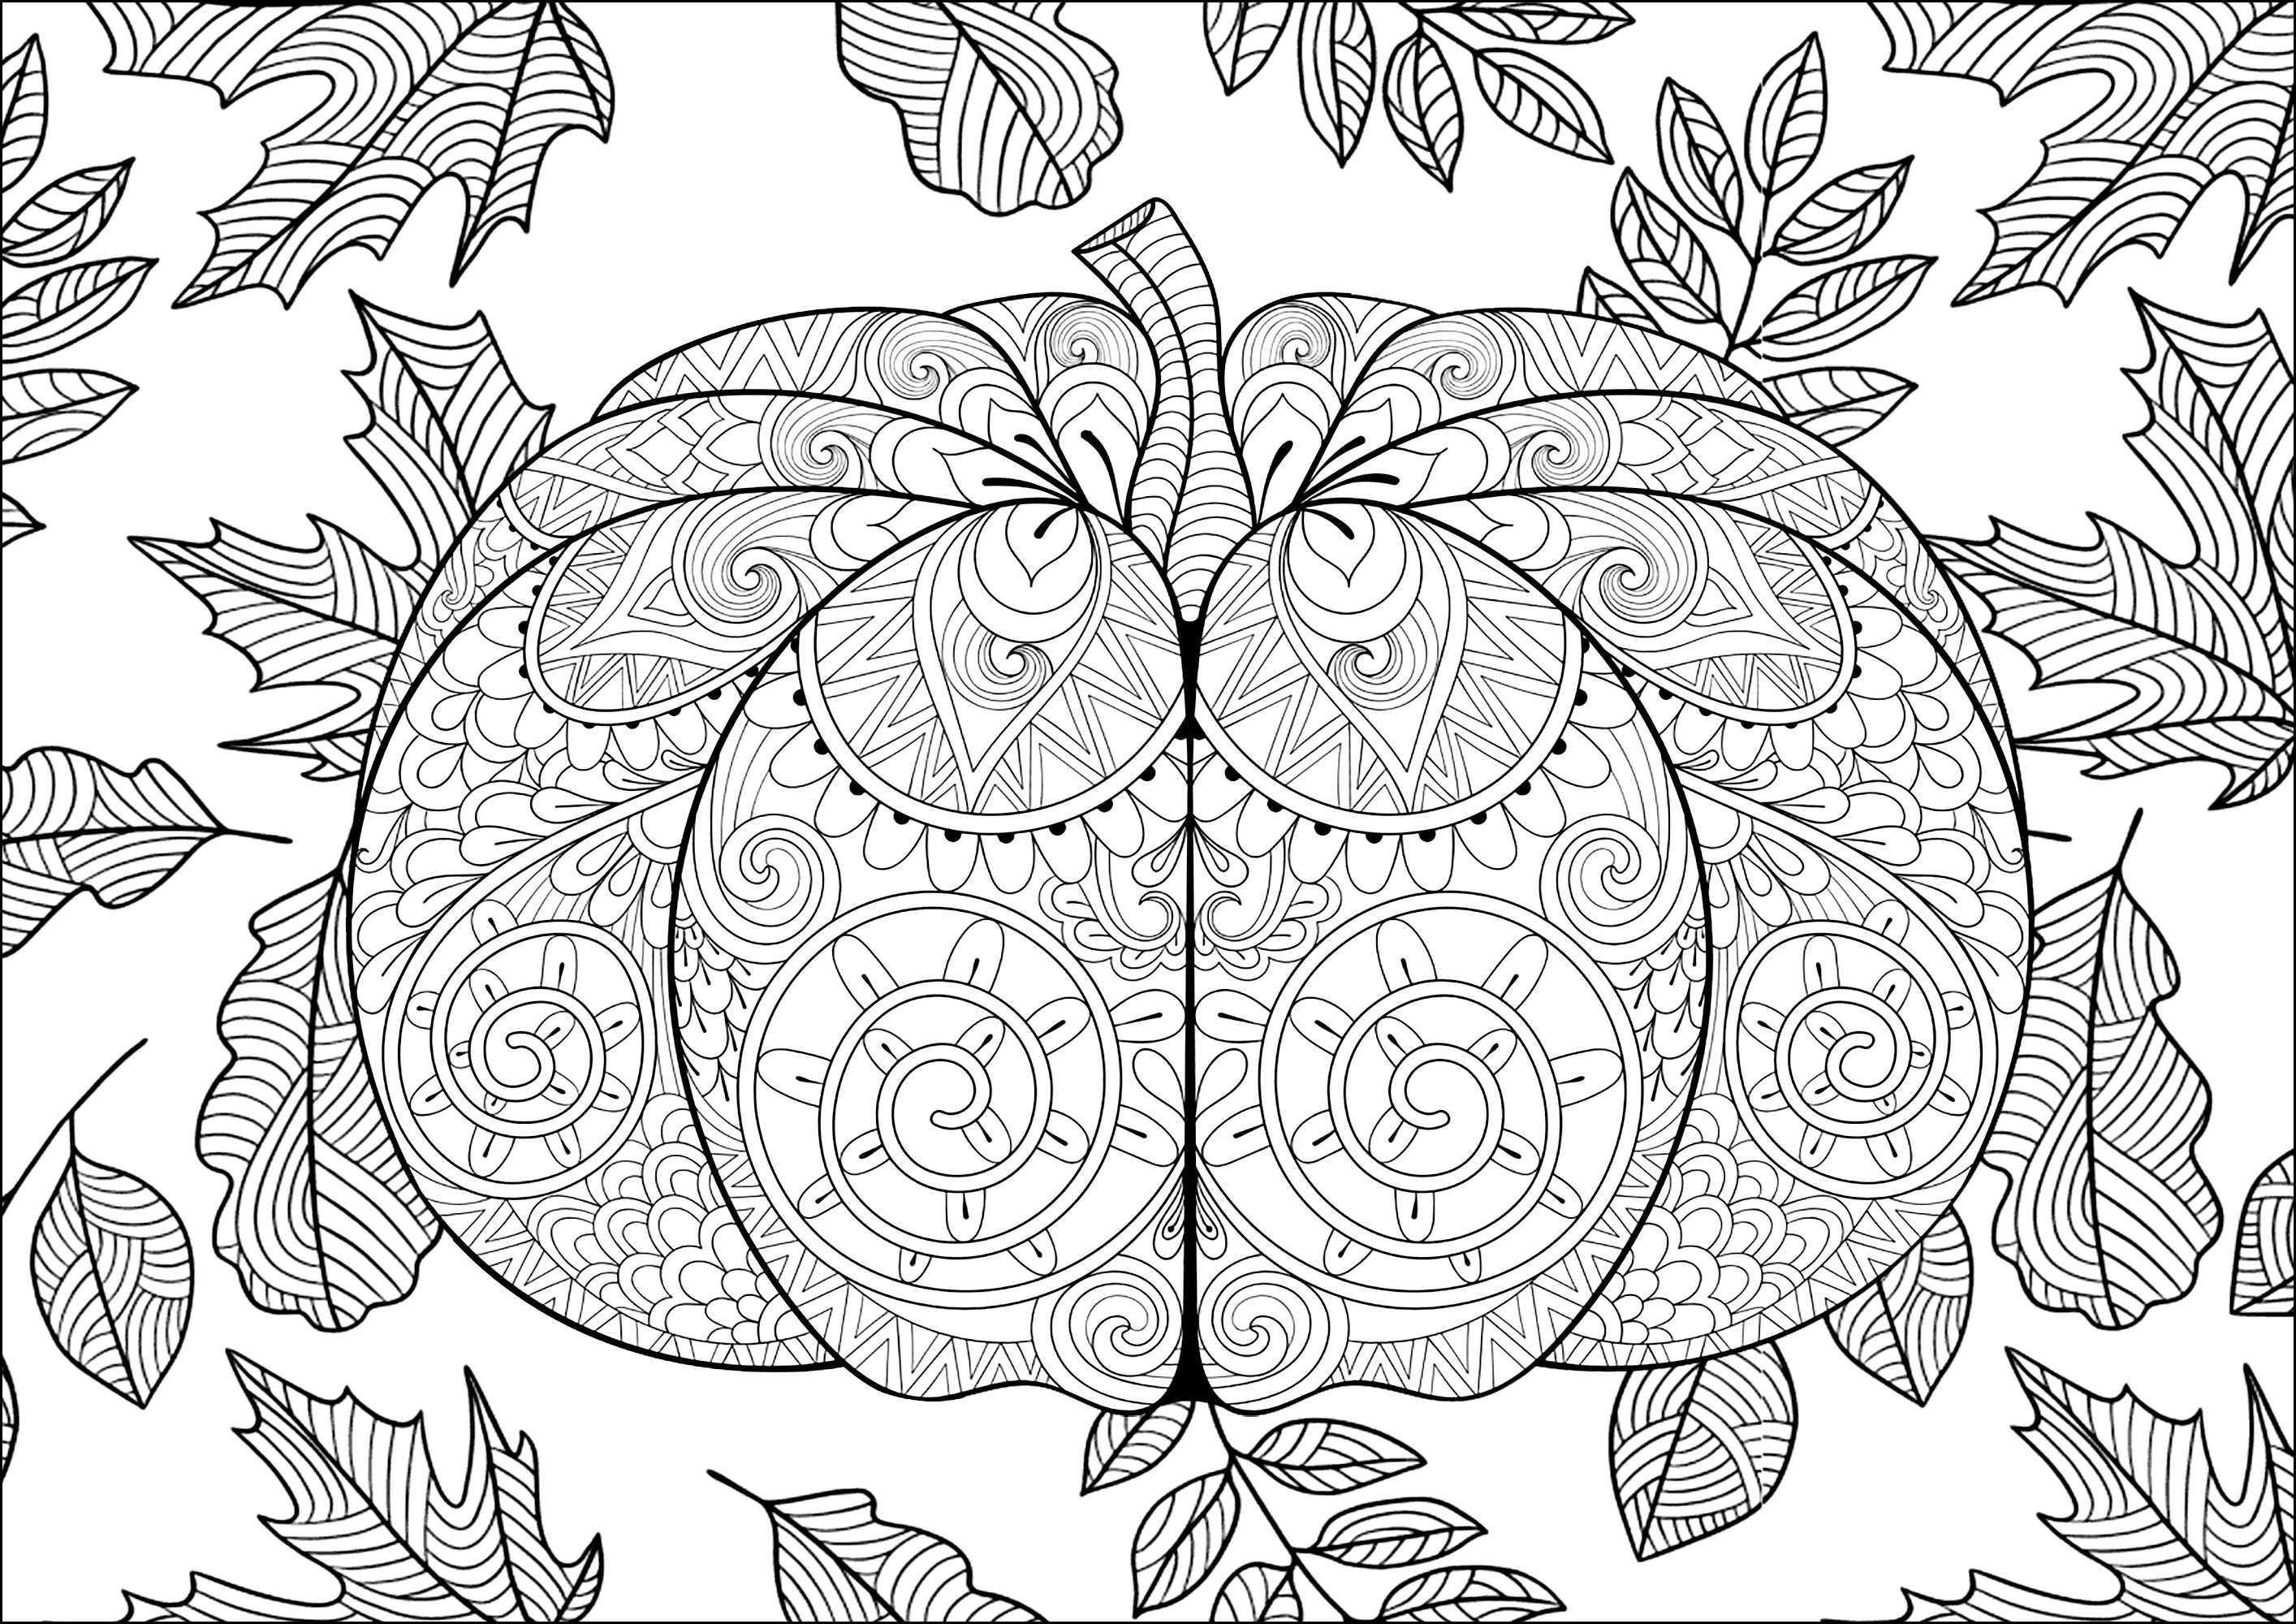 Large Halloween pumpkin. Color all the pumpkin motifs and the leaves in the background, Source : 123rf   Artist : Ipanki